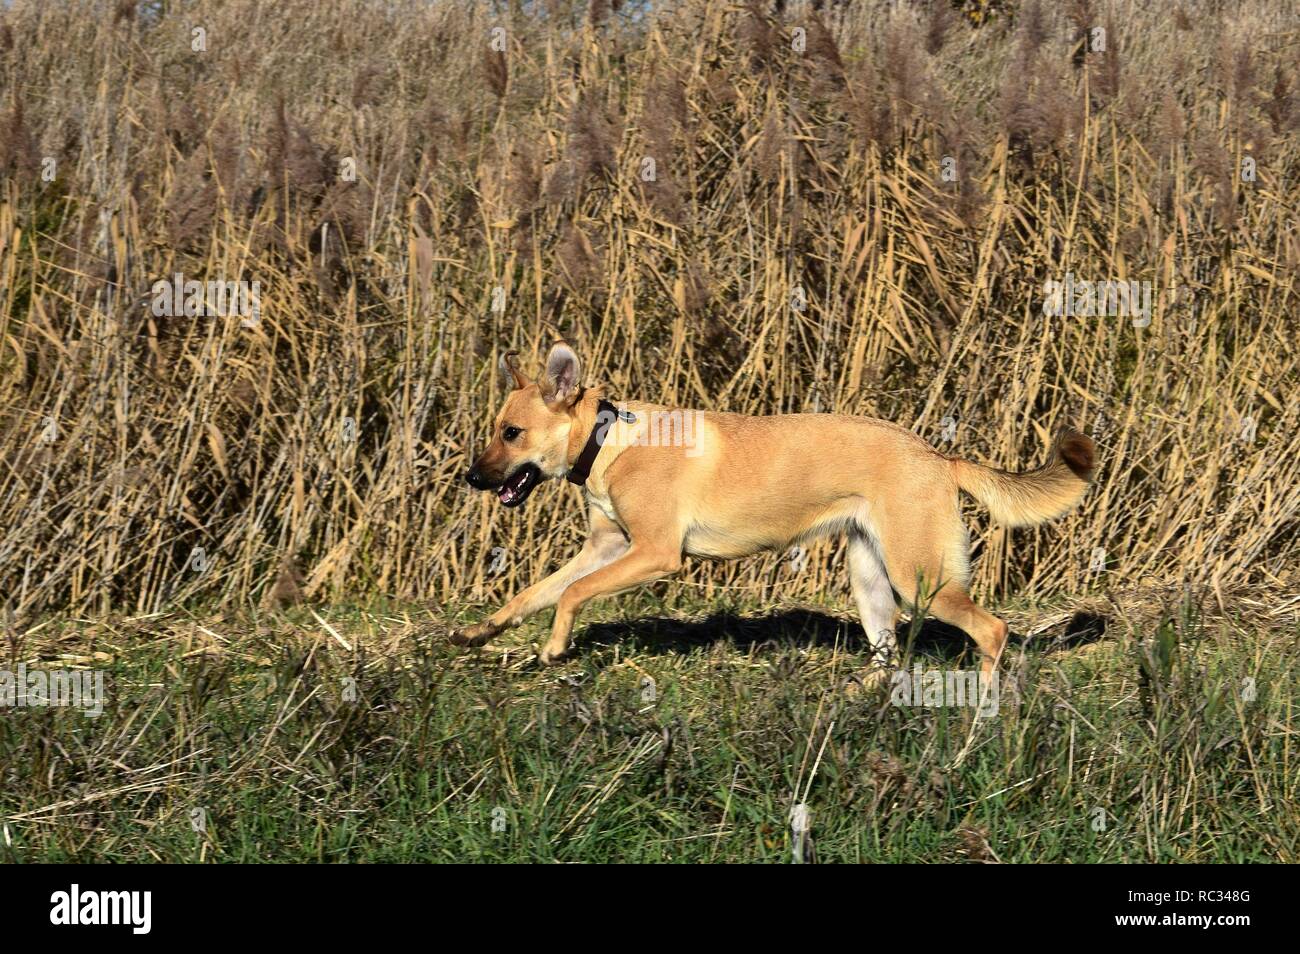 Mixed-breed sand-colored dog running on grass. Sword grass in the background. Stock Photo